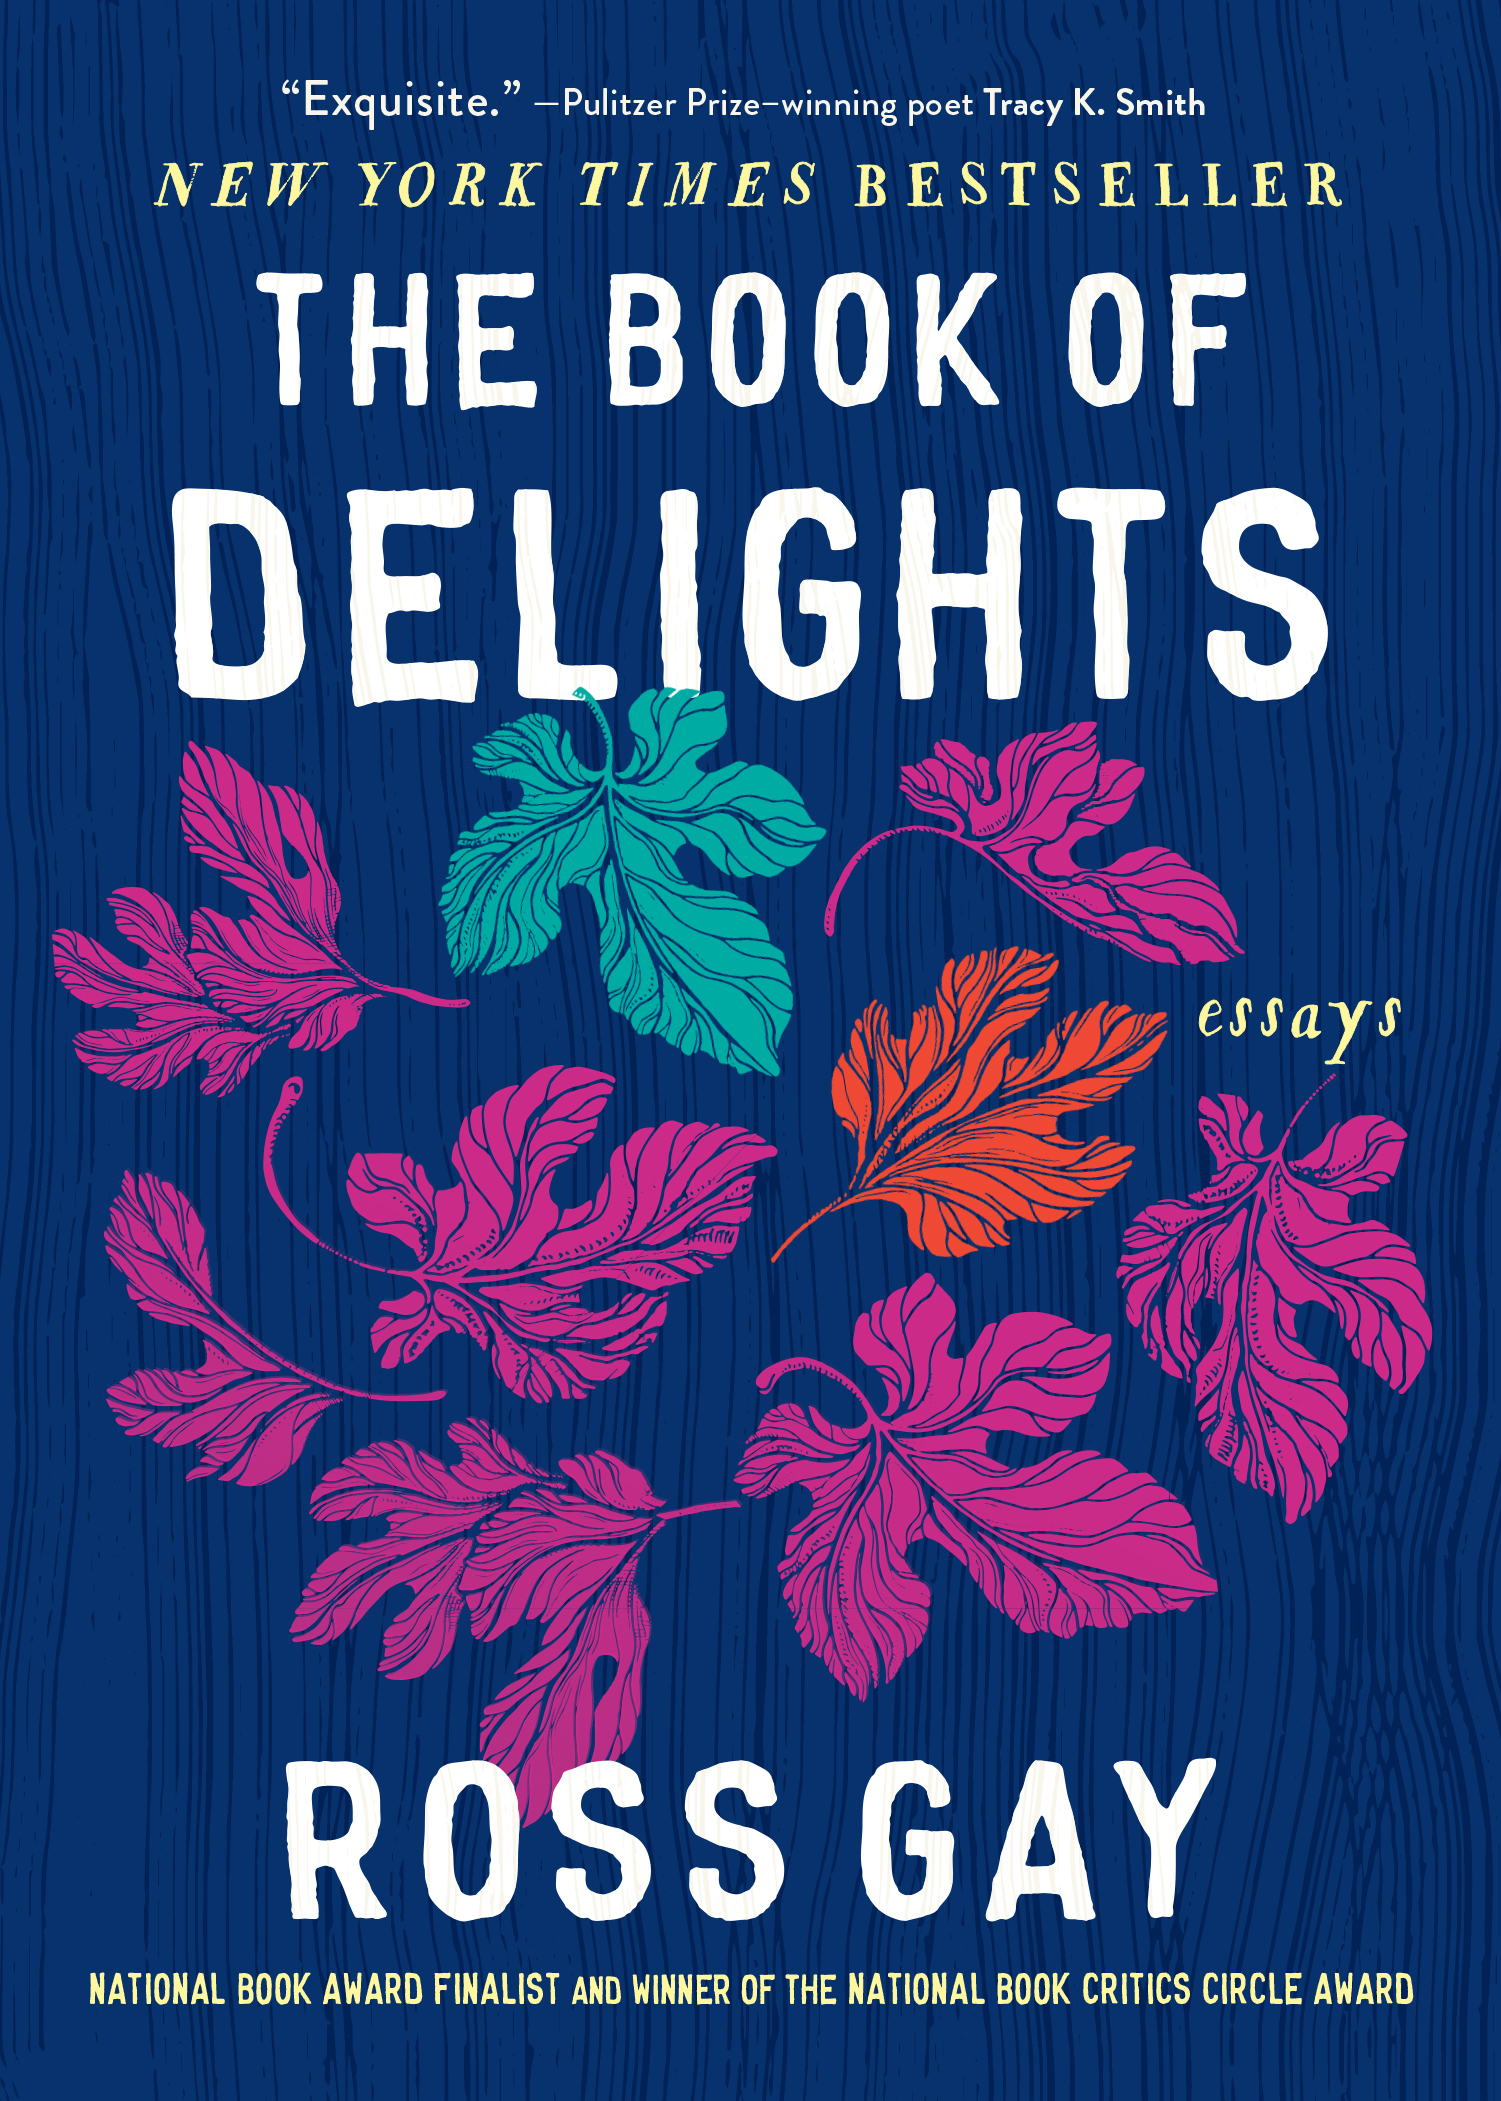 Double Fisting Sleeping - The Book of Delights by Ross Gay | Hachette Book Group